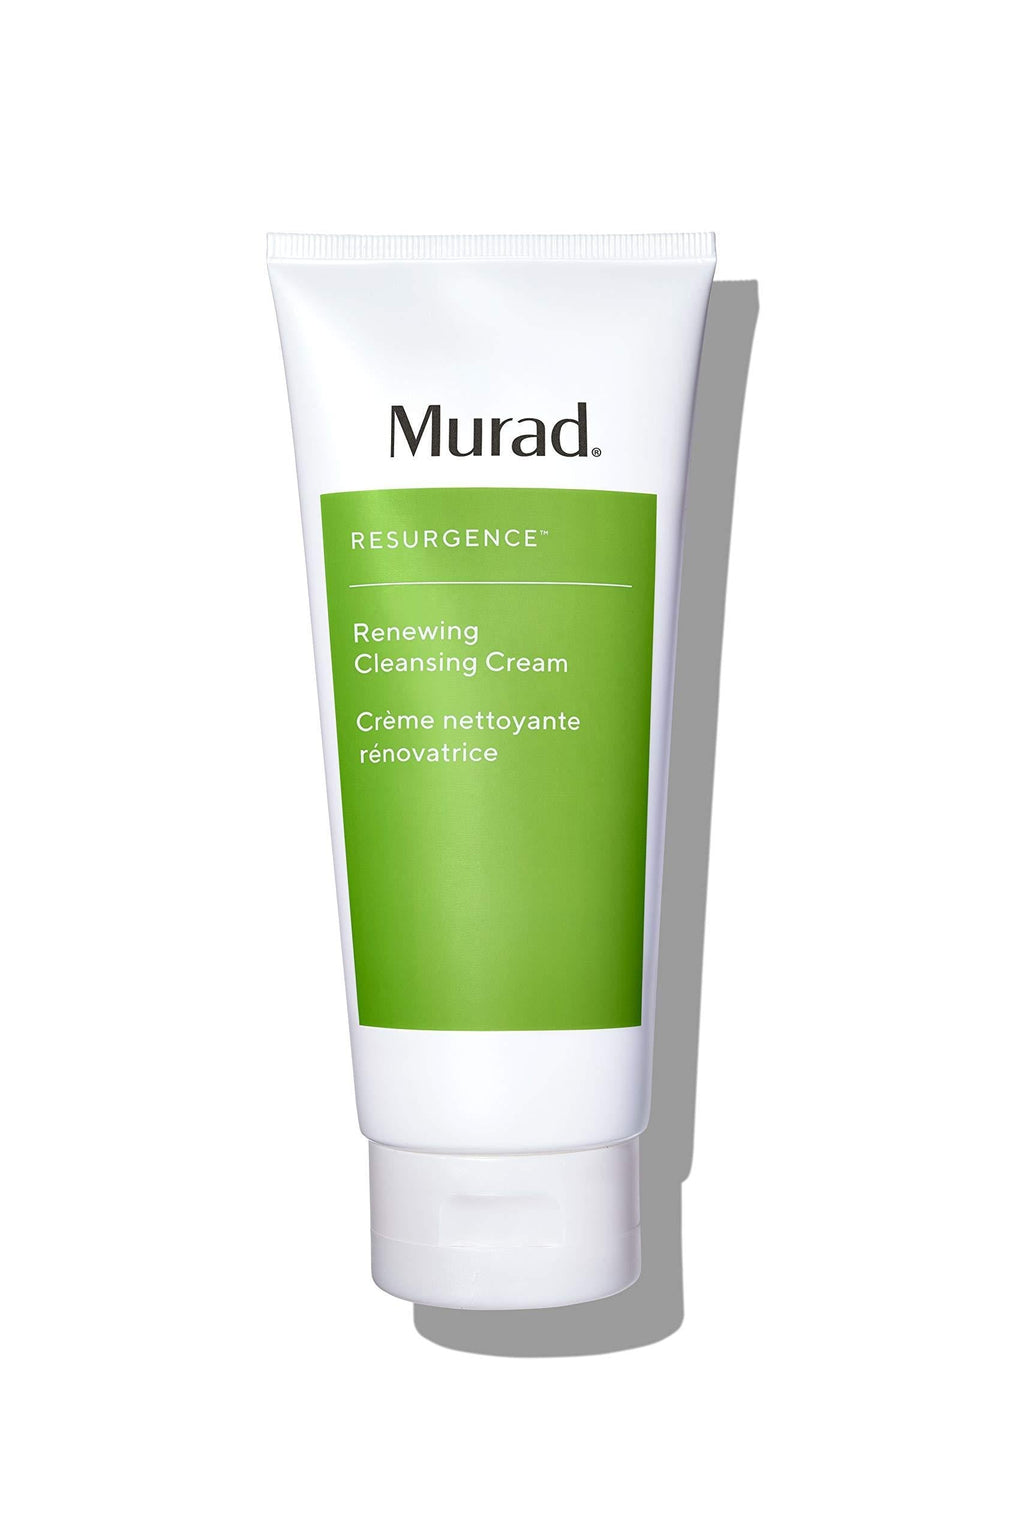 [Australia] - Murad Resurgence Renewing Cleansing Cream - Anti-Aging, Cleansing Cream Face Wash - Hydrating Daily Face Cleanser, 6.75 Fl Oz 6.75 Fl Oz (Pack of 1) 